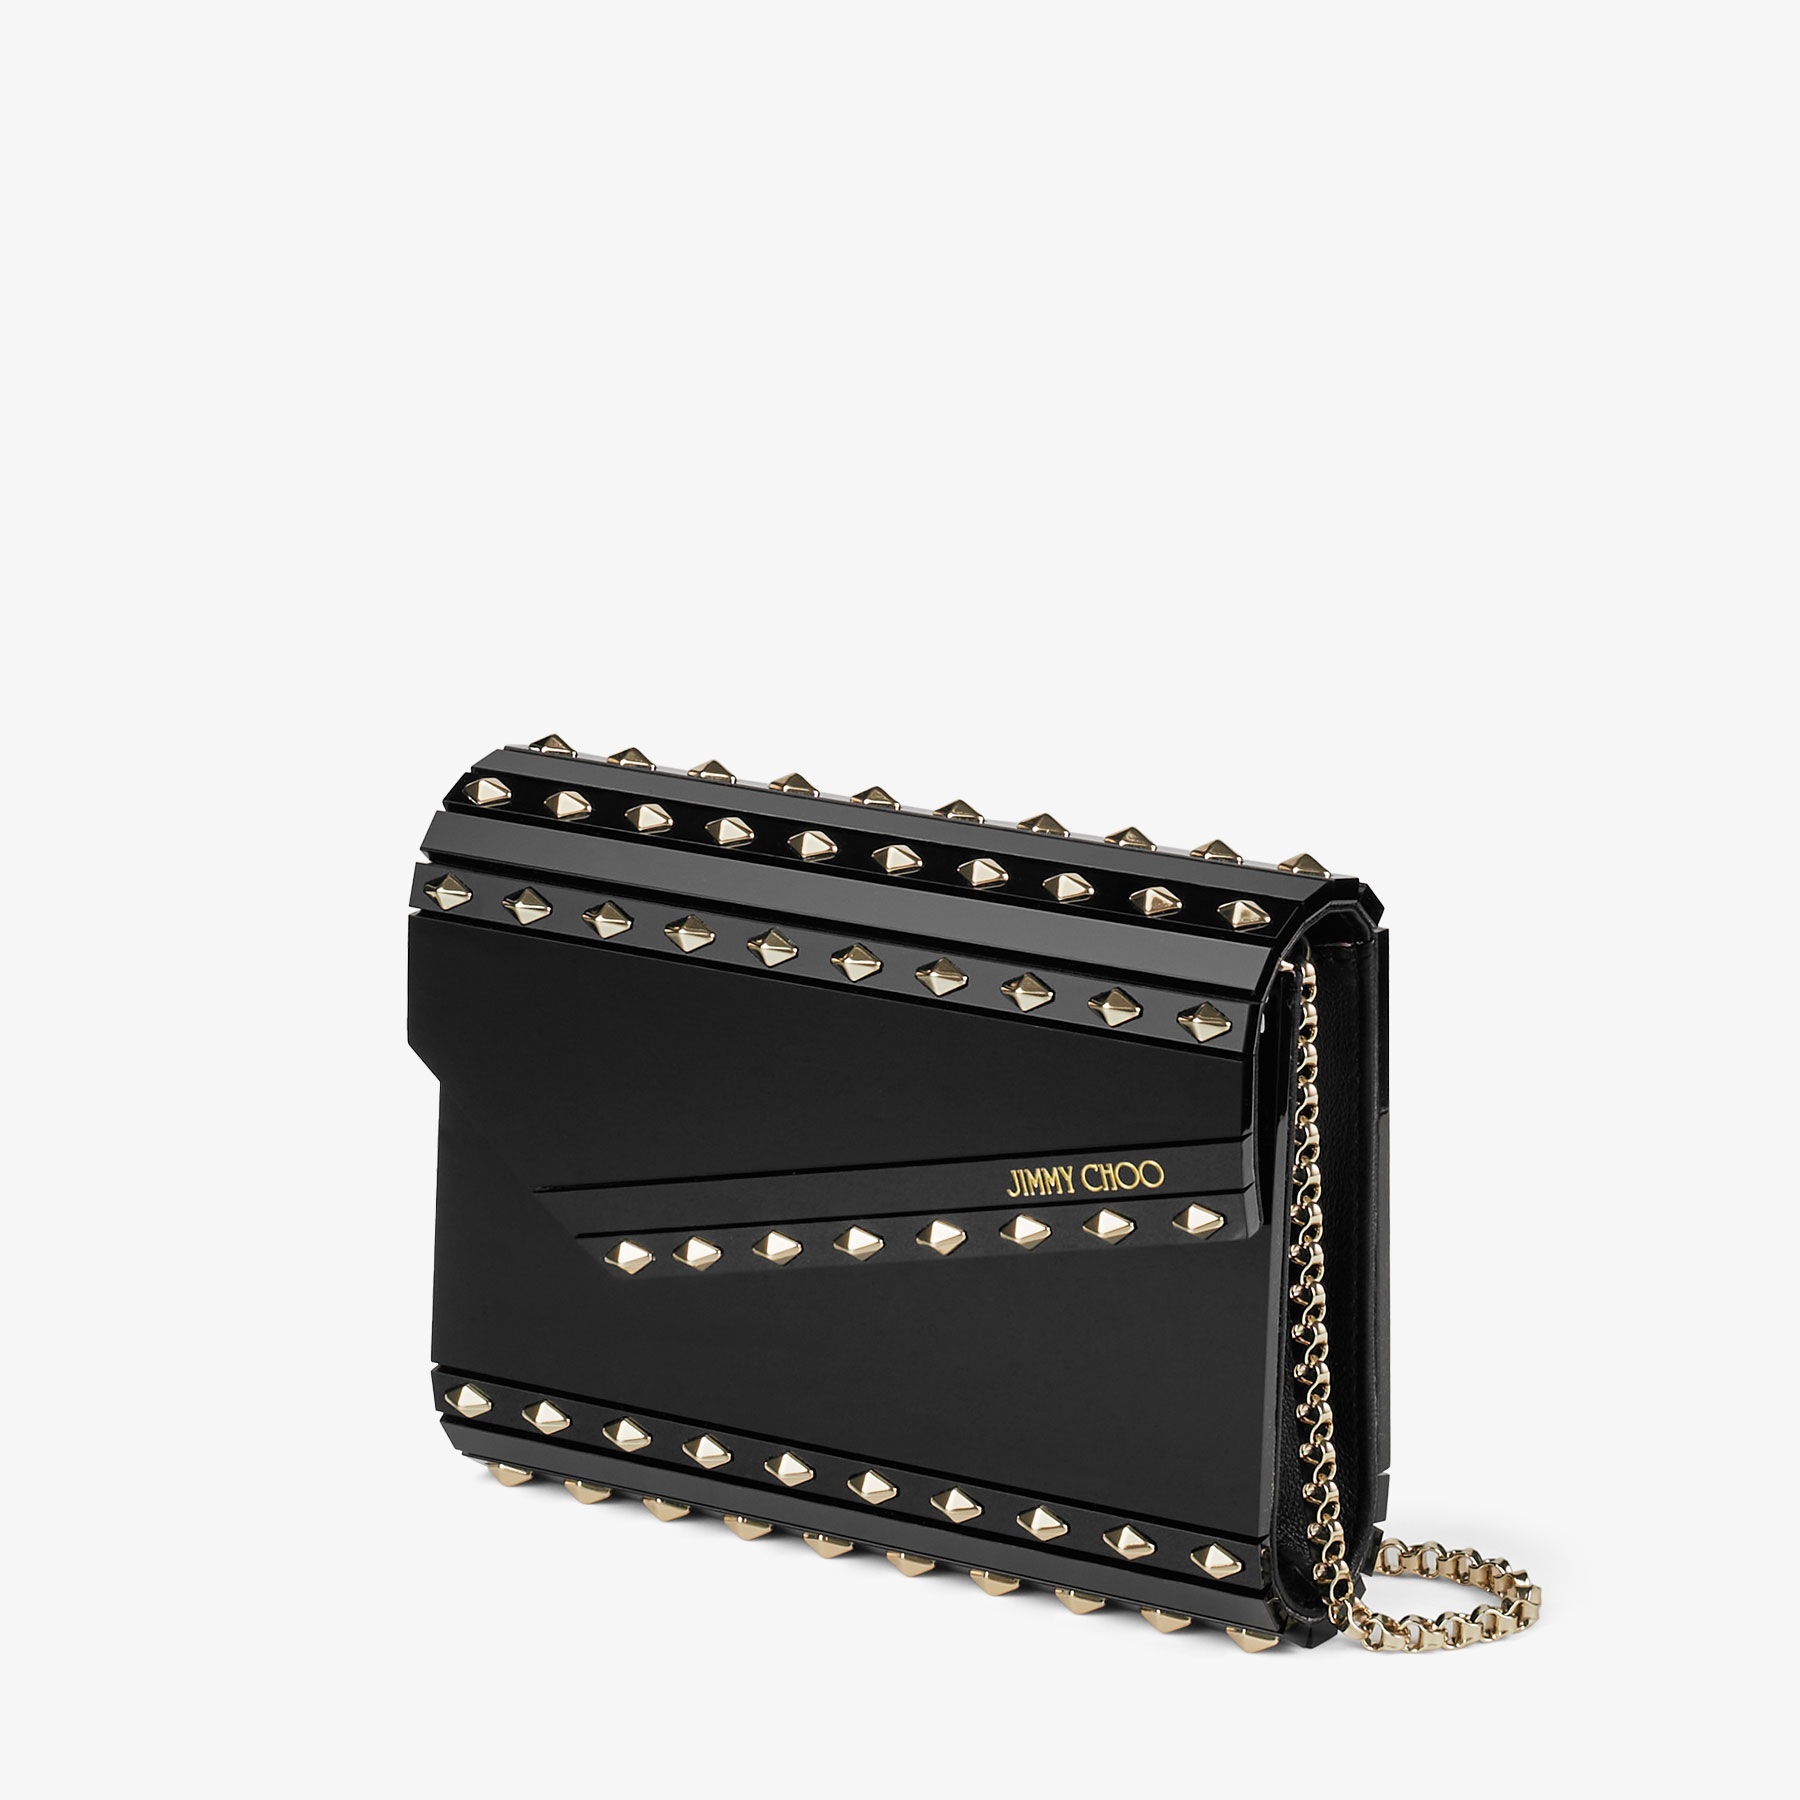 Candy
Black Acrylic Clutch Bag with Studs - 3